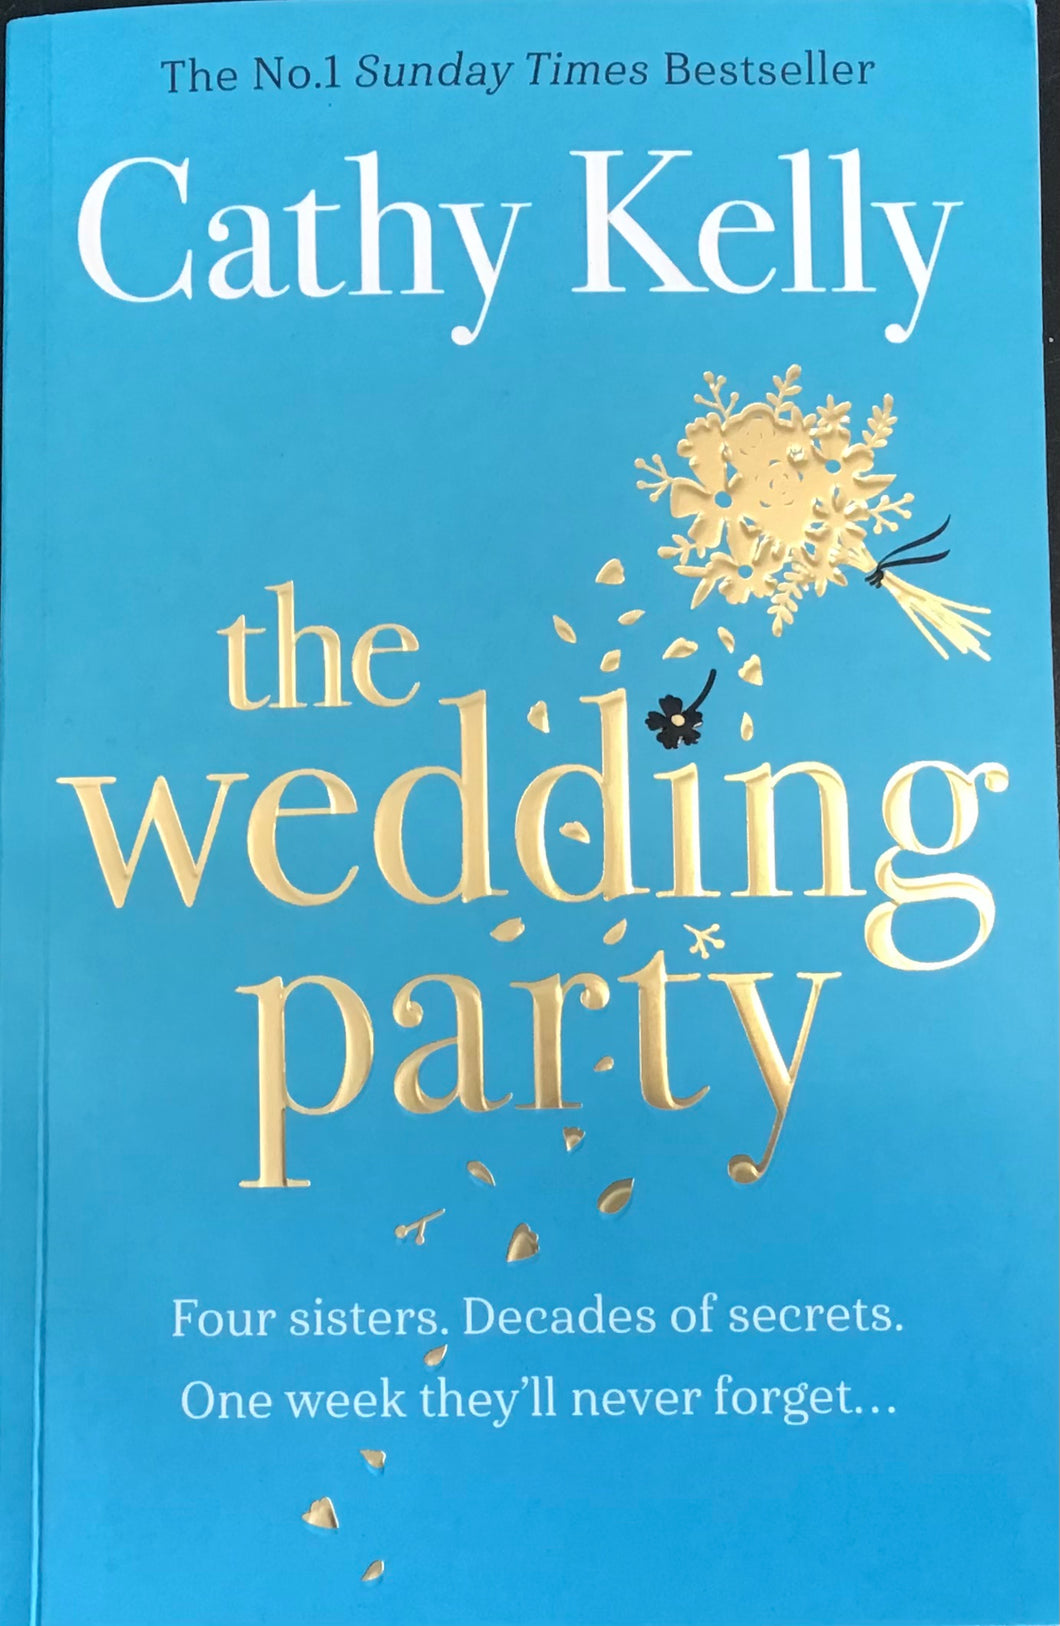 The Wedding Party- Cathy Kelly